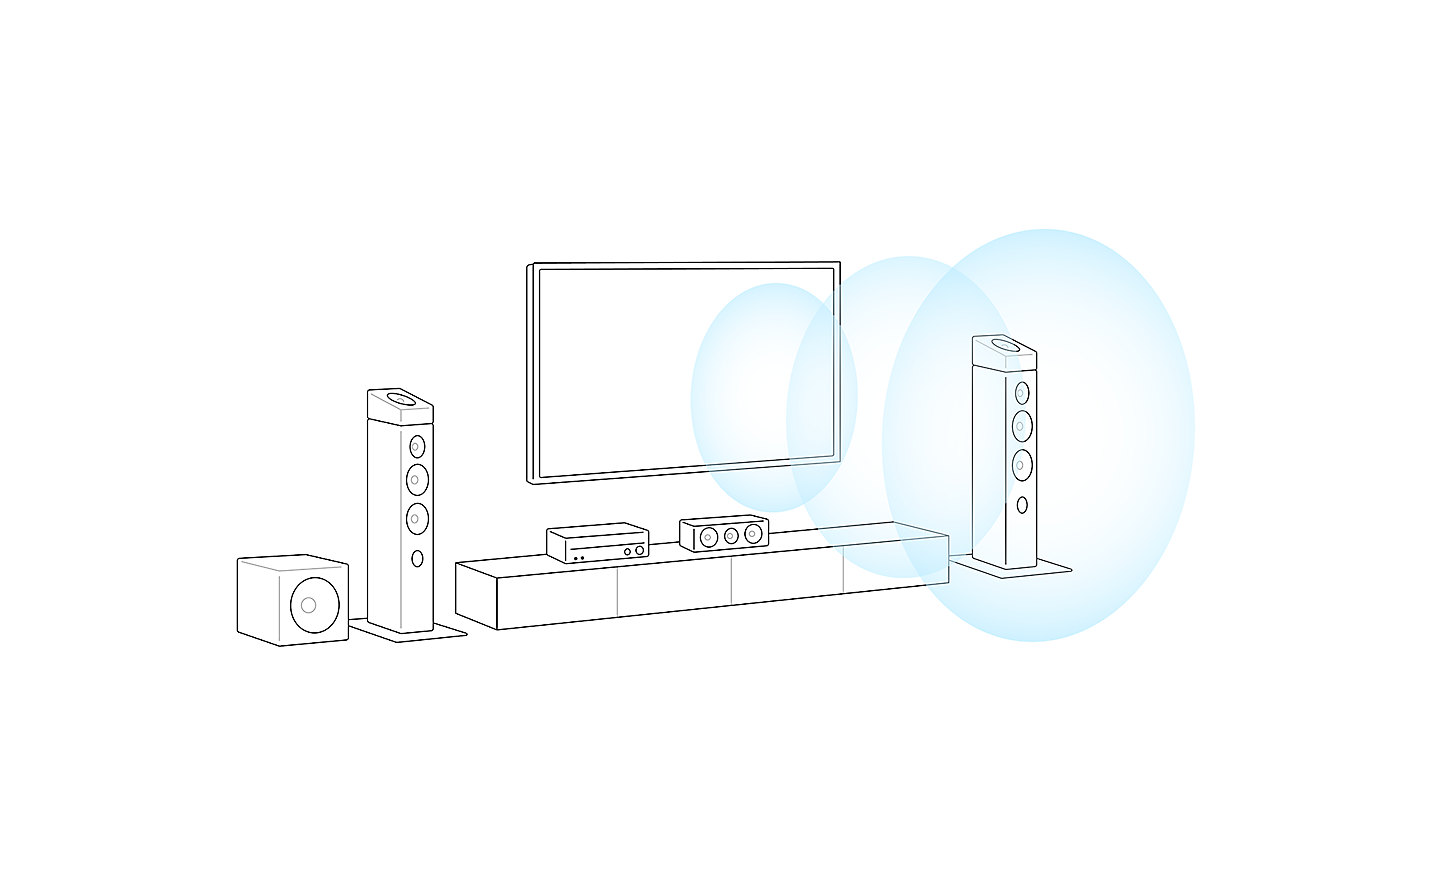 Outline-only image of a TV setup. 3 blue circles are coming out of the centre of the TV representing the sound direction